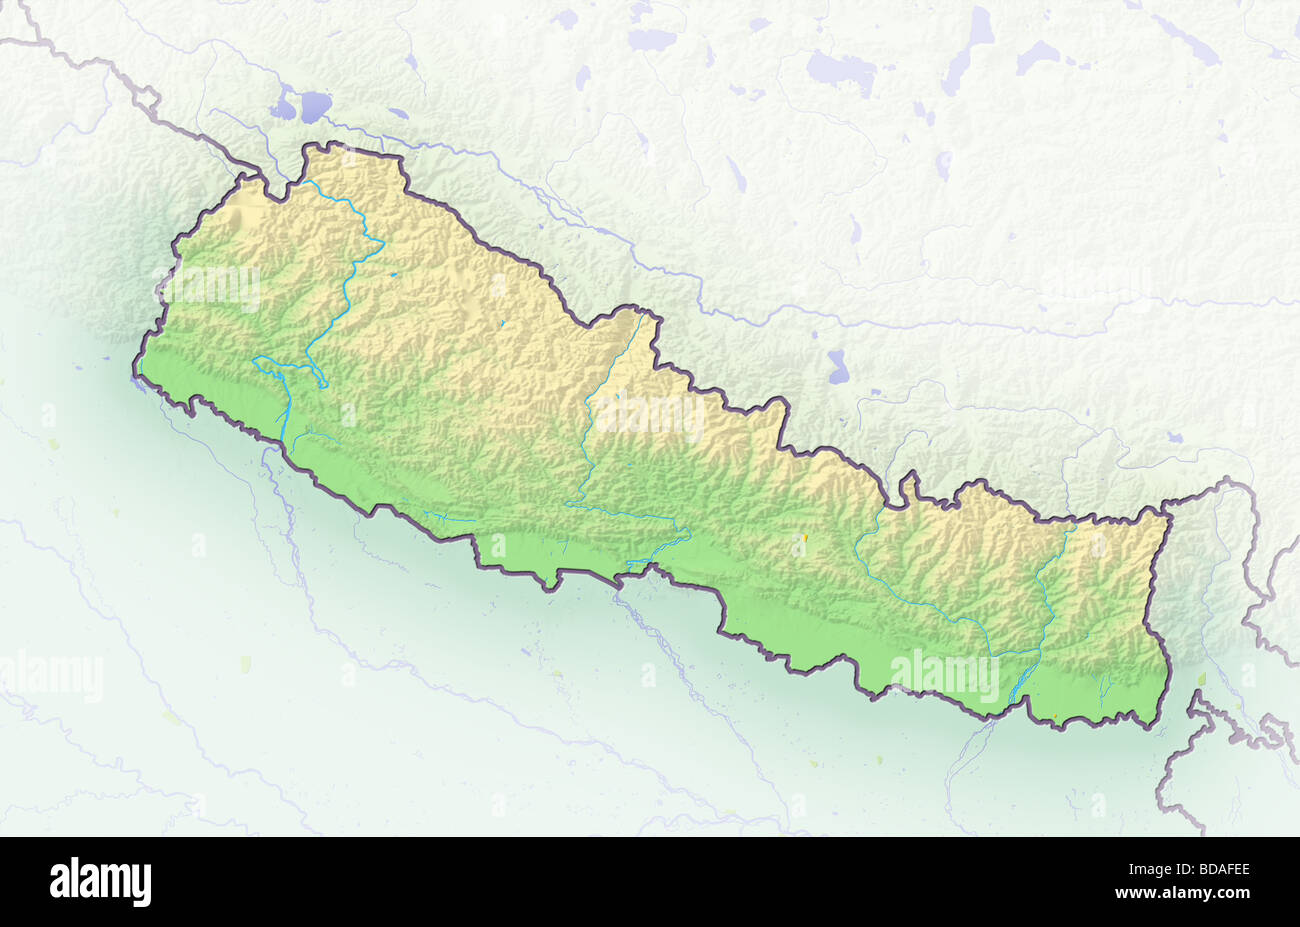 Nepal, shaded relief map. Stock Photo